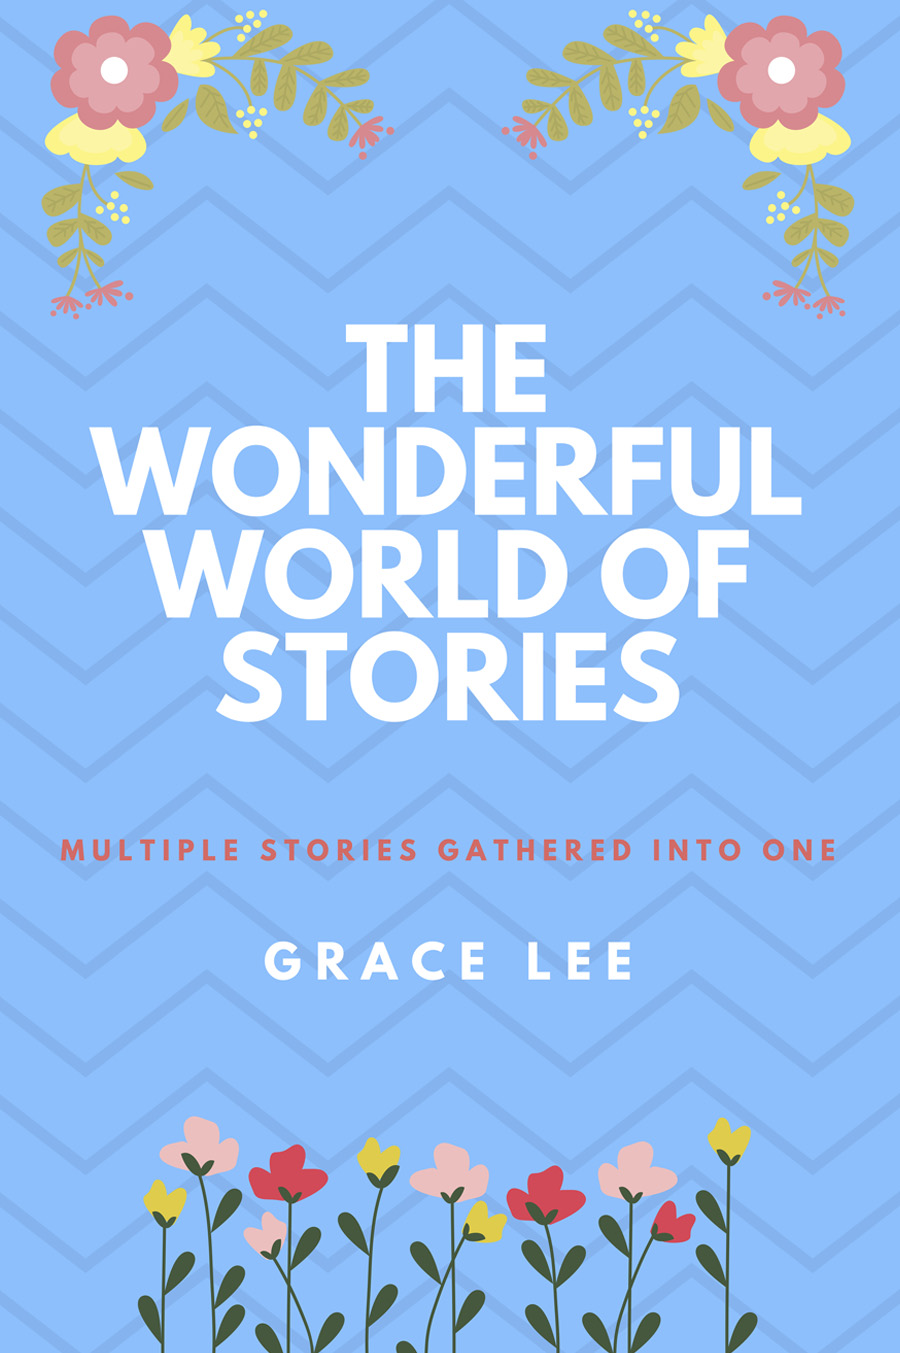 The Wonderful World of Stories